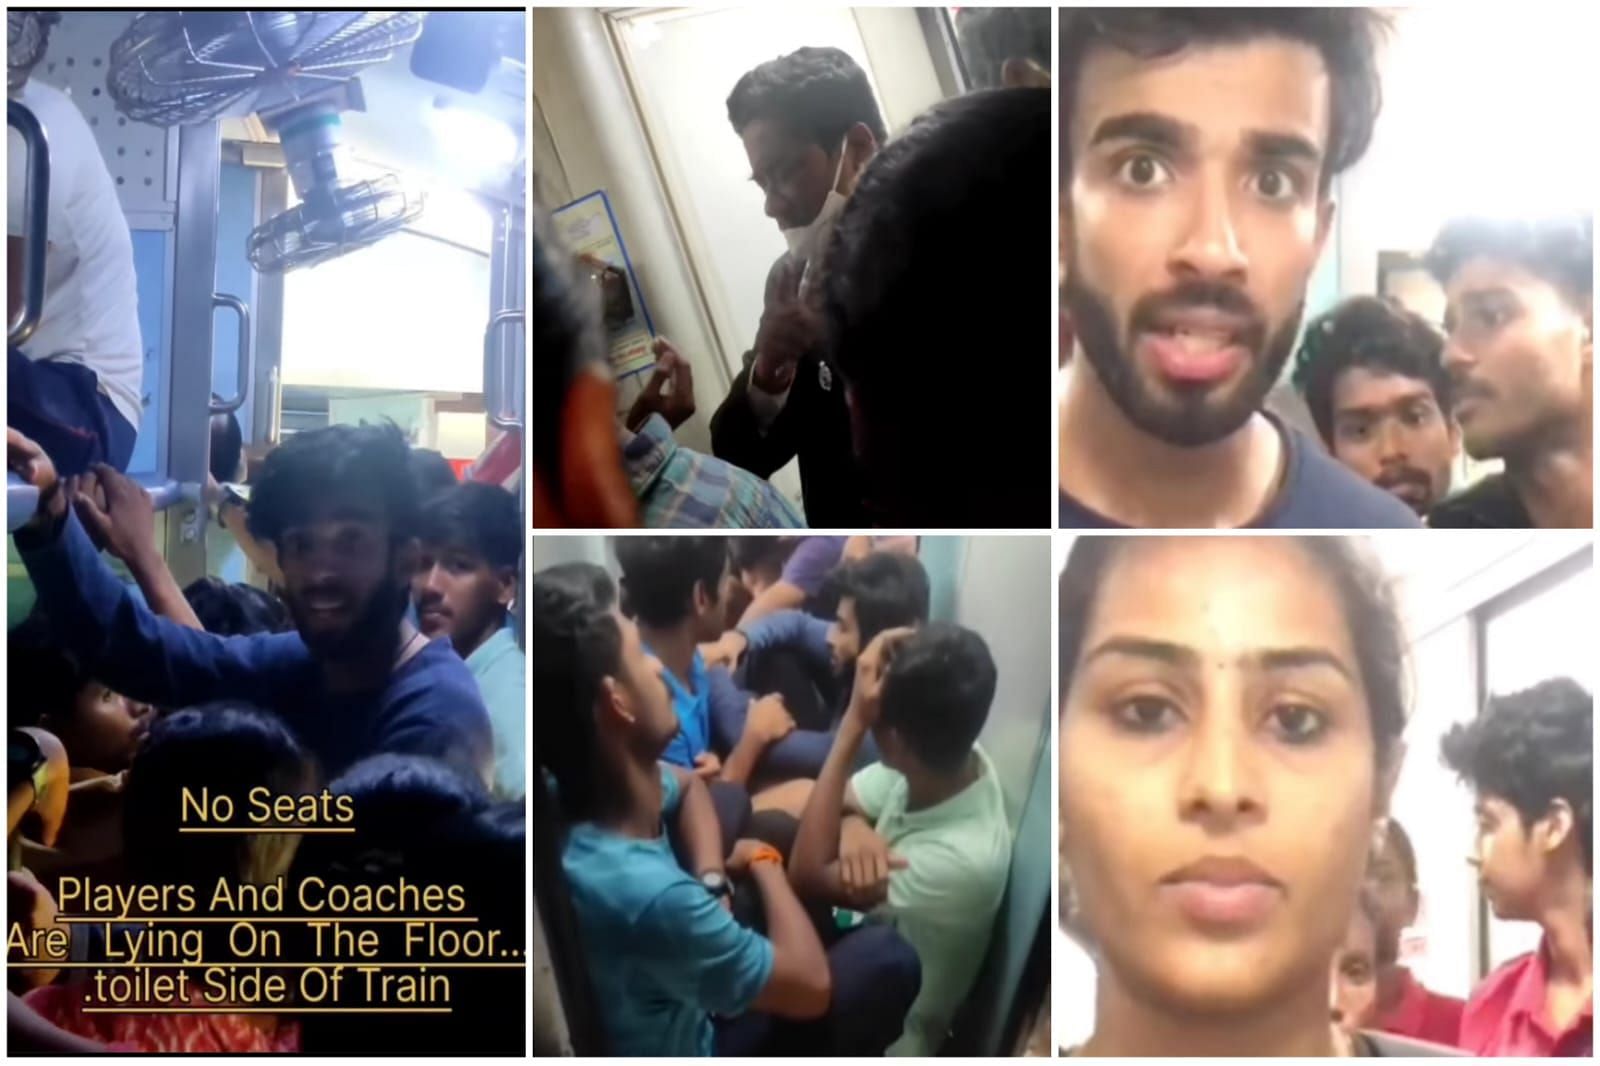 [WATCH] Students from Calicut University provided poor travelling facilities while returning home from Khelo India University Games